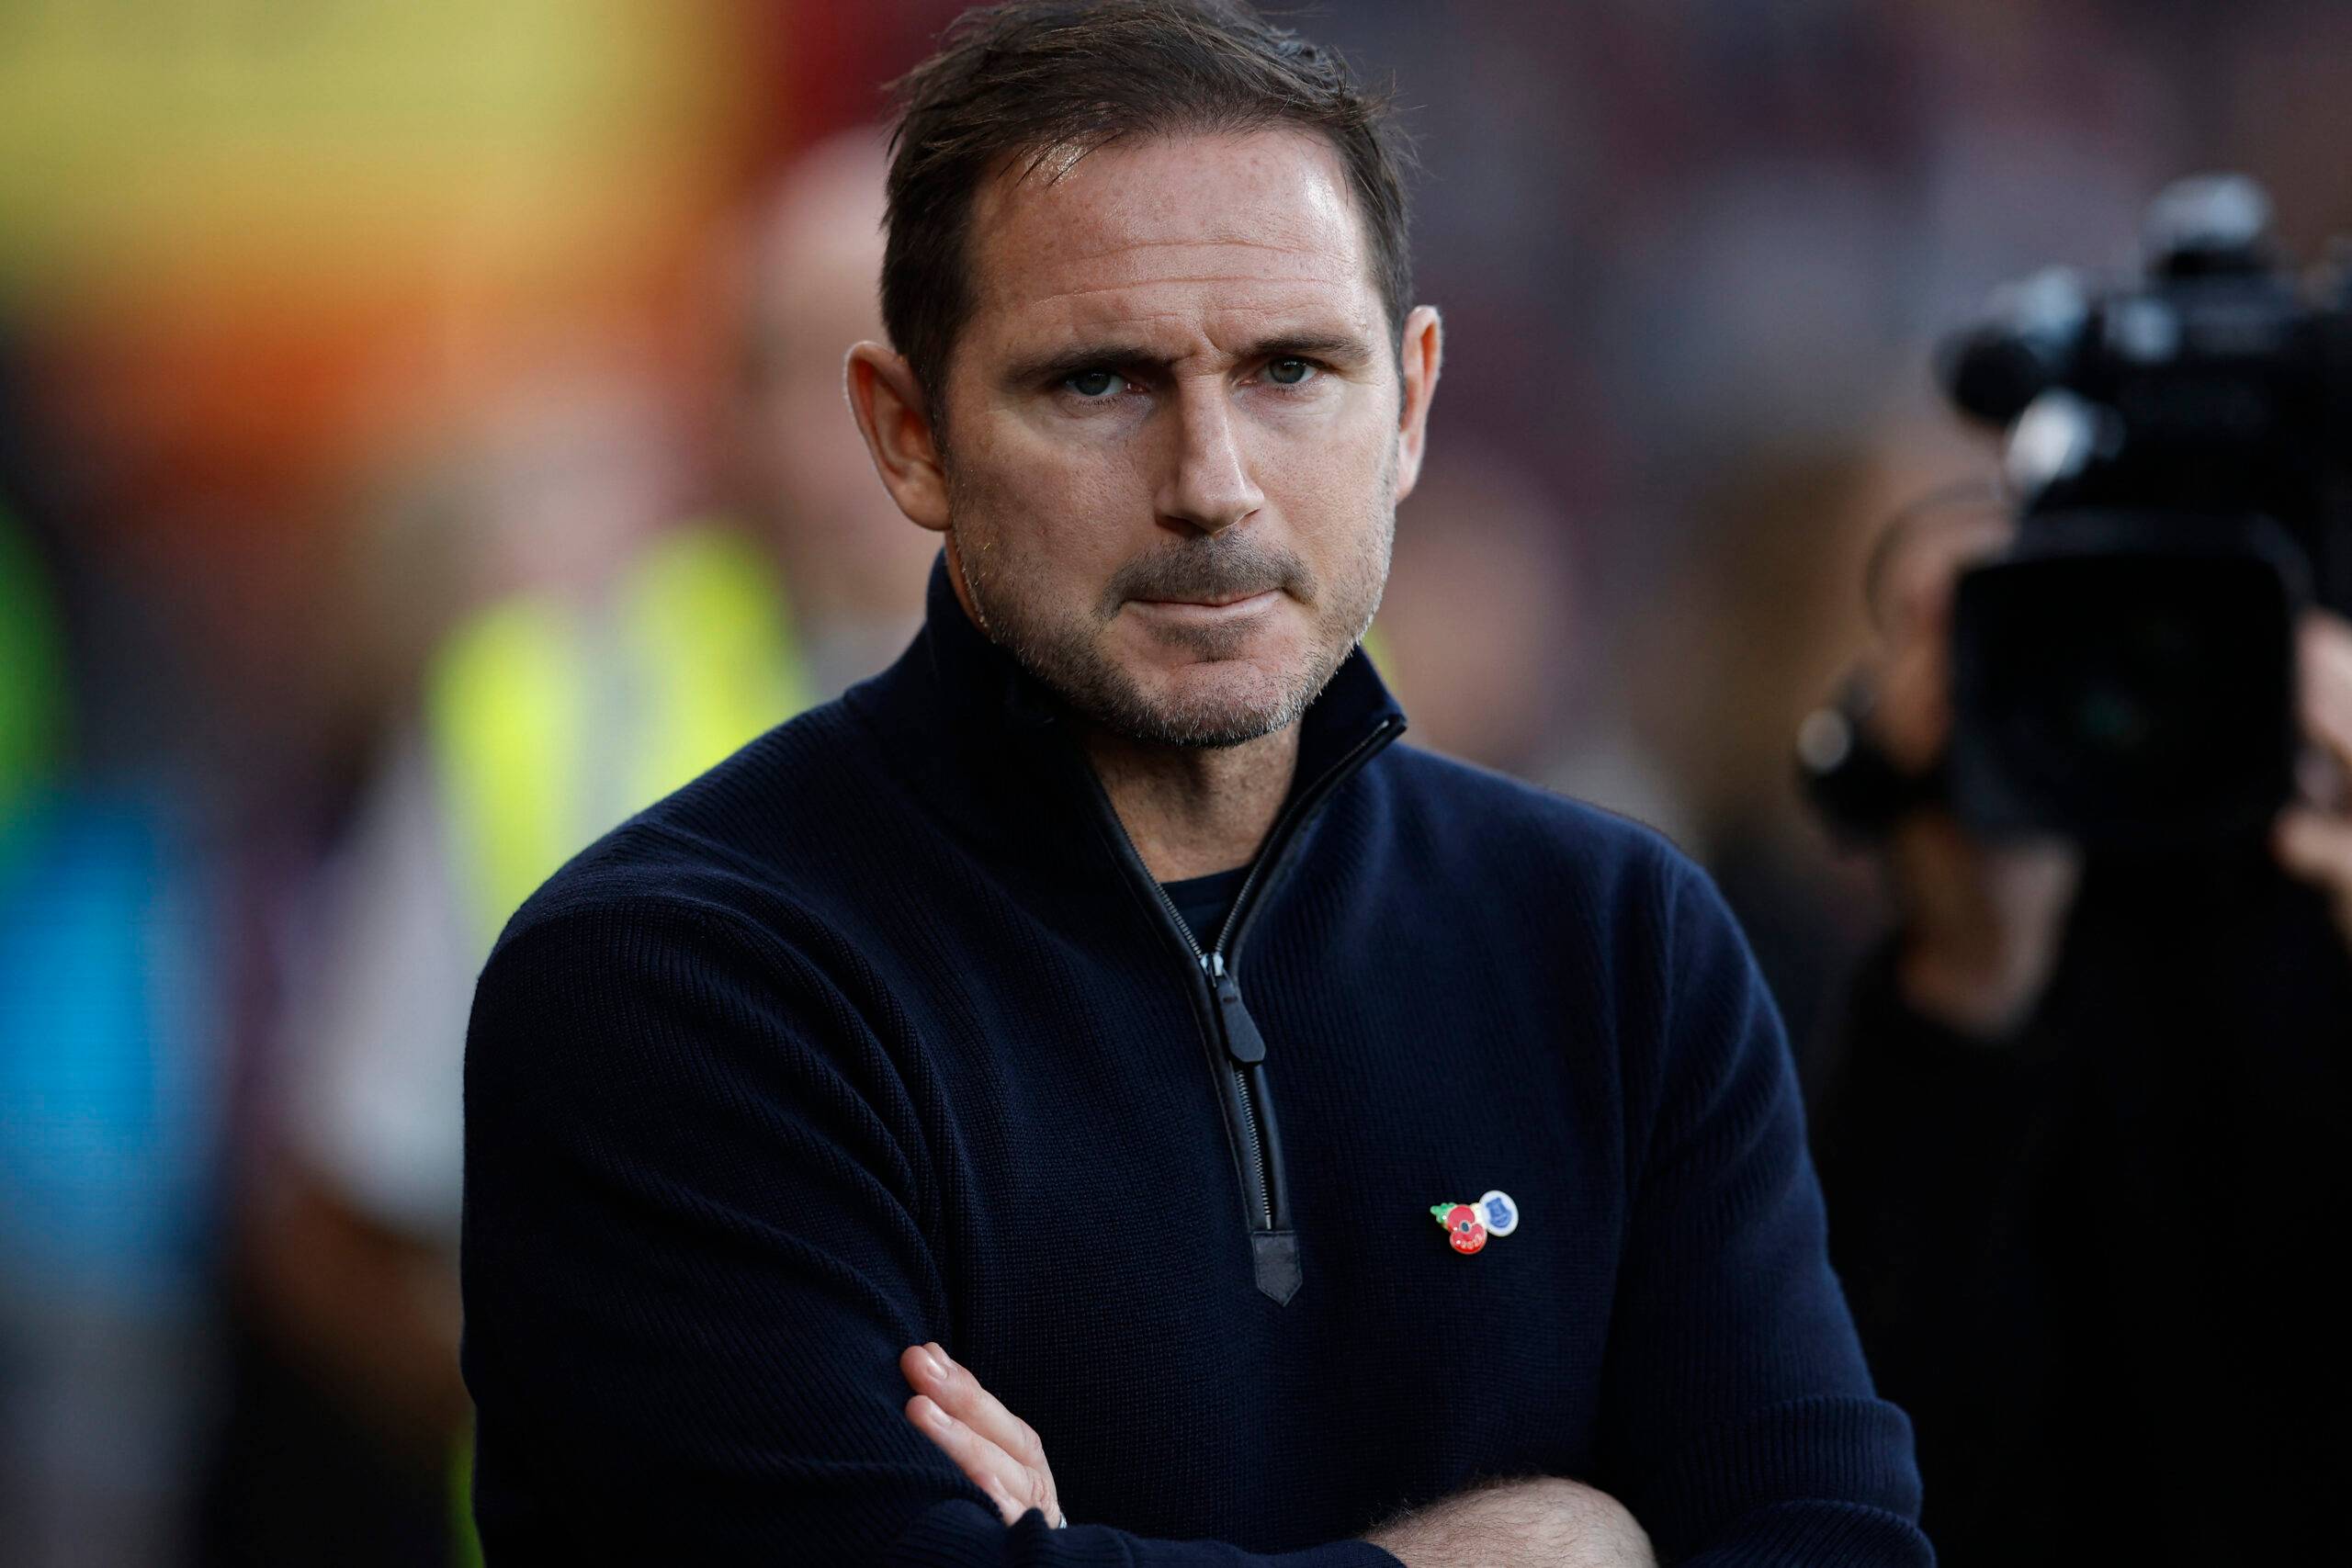 Frank Lampard on the touchline before AFC Bournemouth against Everton